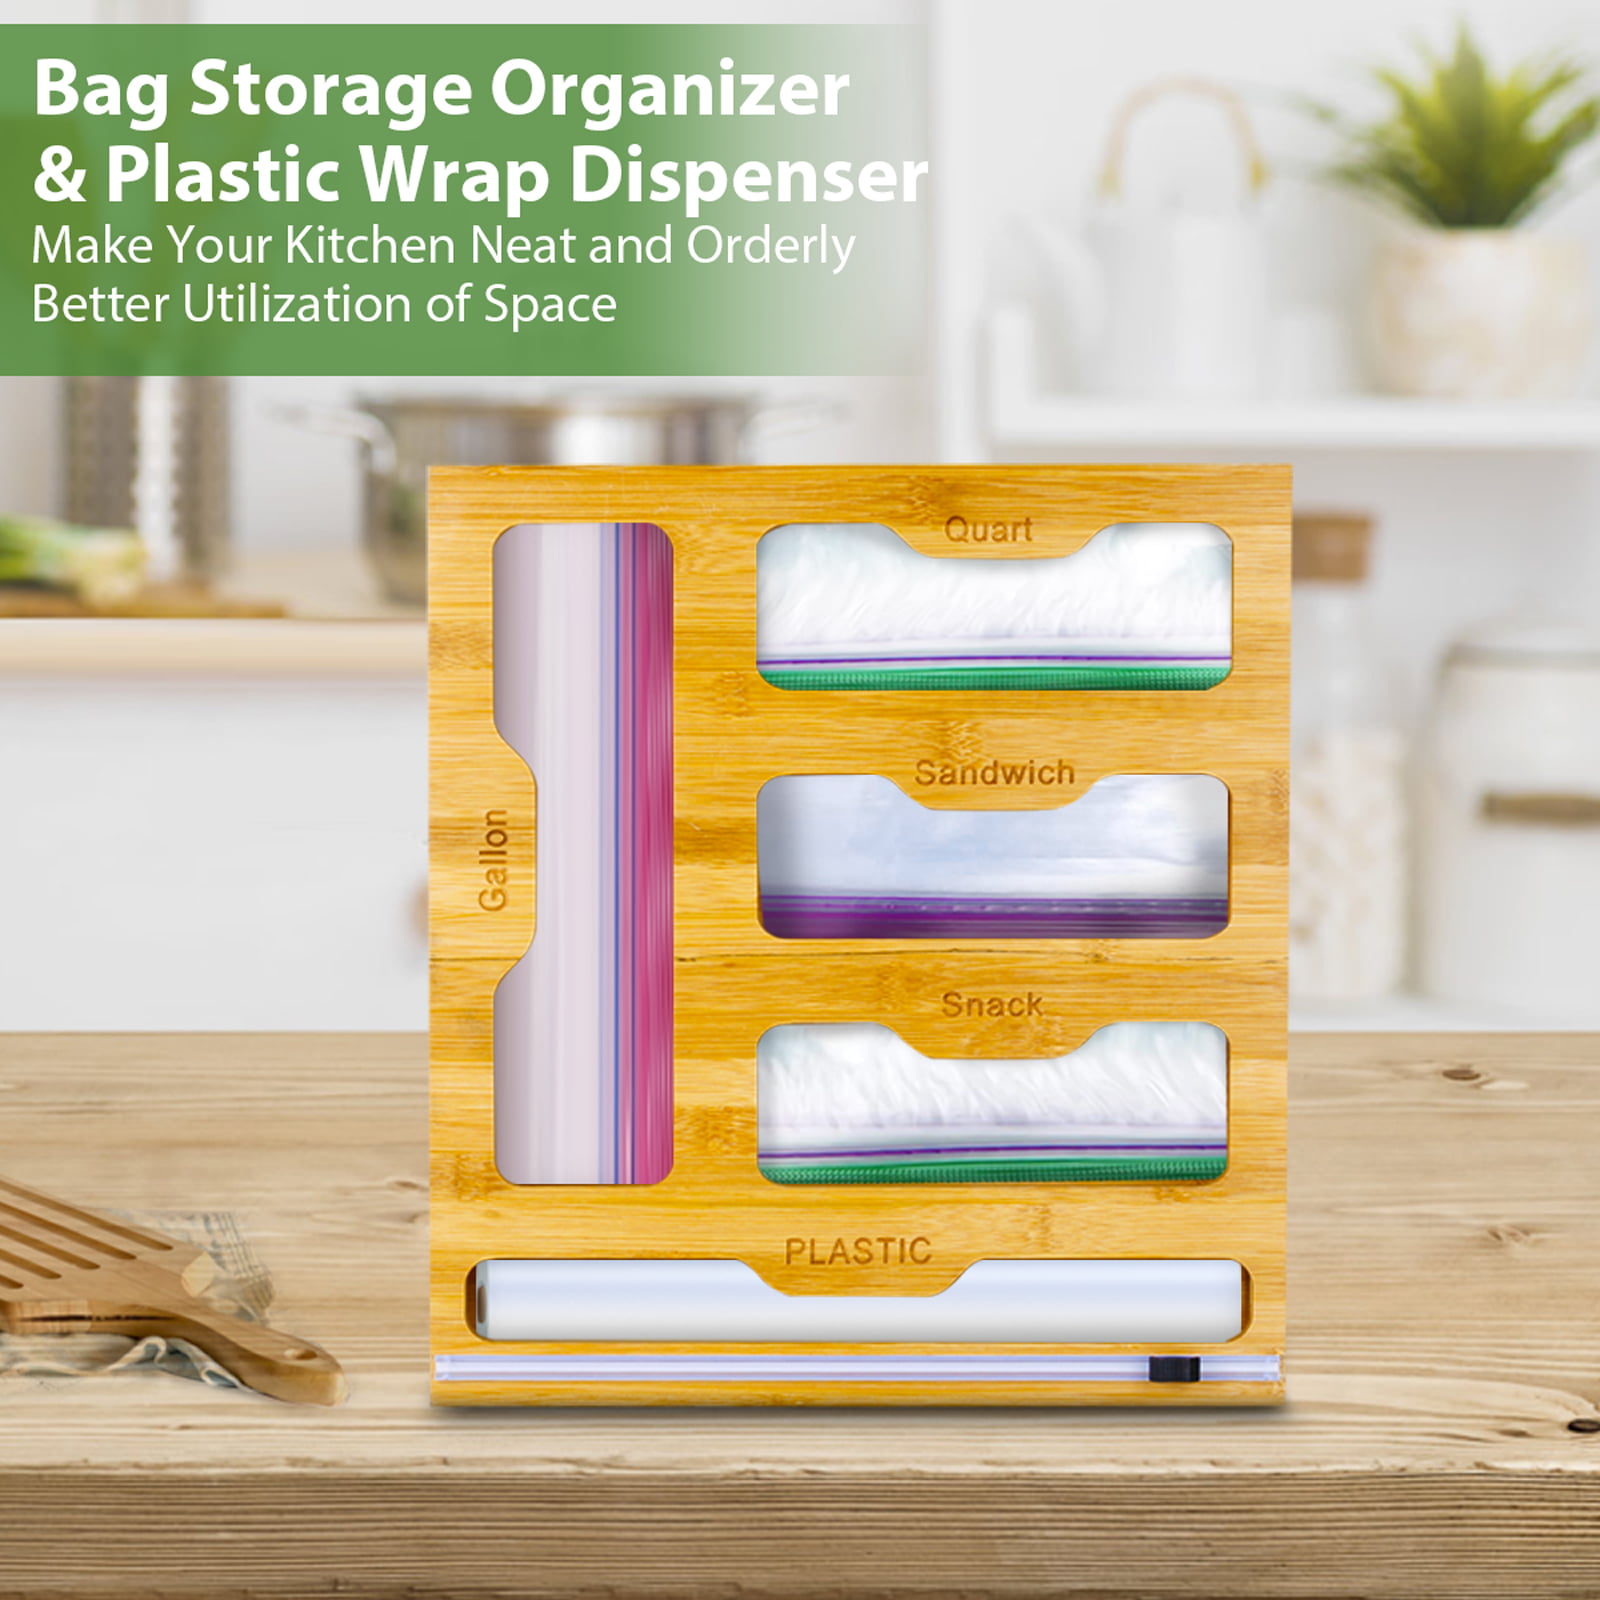 Bamboo Ziplock Bag Storage Organizer with Openable Top Lids l